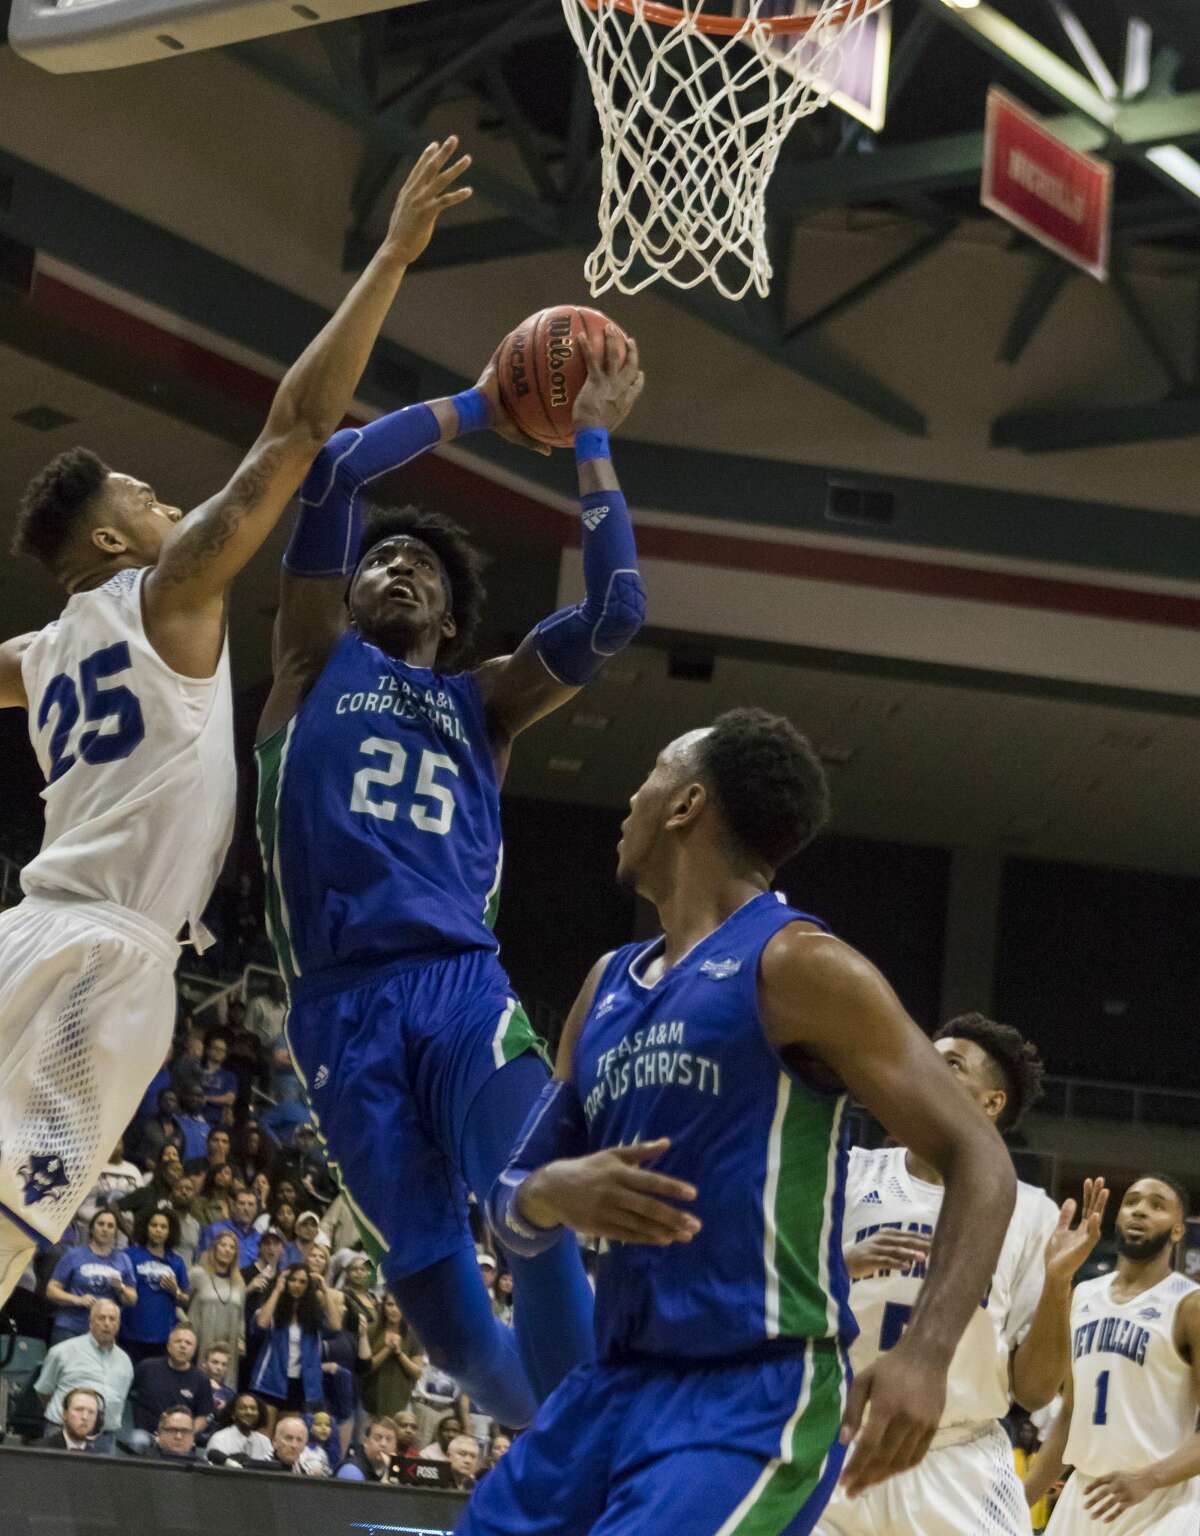 Texas A&M-Corpus Christi's Rashawn Thomas, center, misses a layup attempt late in the second half against New Orleans in an NCAA college basketball game for the championship of the Southland Conference tournament Saturday, March 11, 2017, in Katy, Texas. (AP Photo/Joe Buvid)